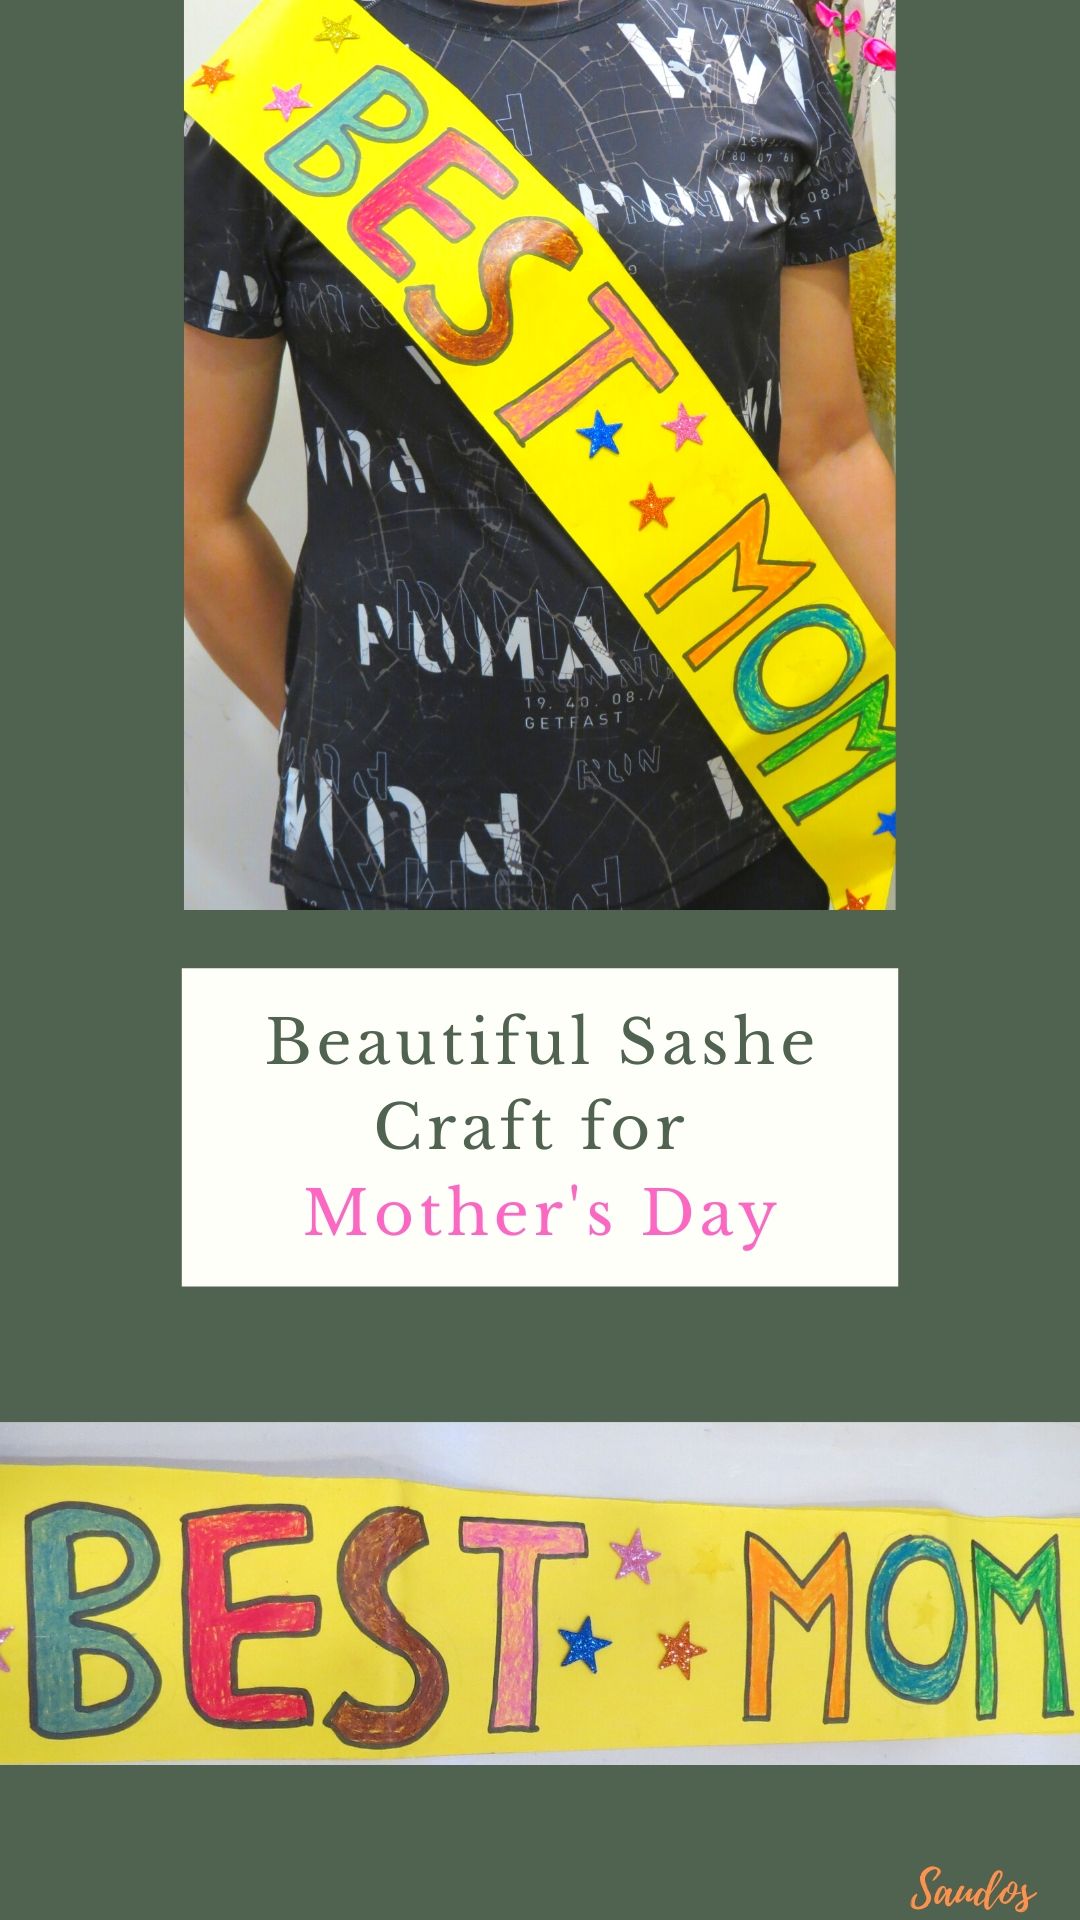 Beautiful Sashe Craft for Mother's Day